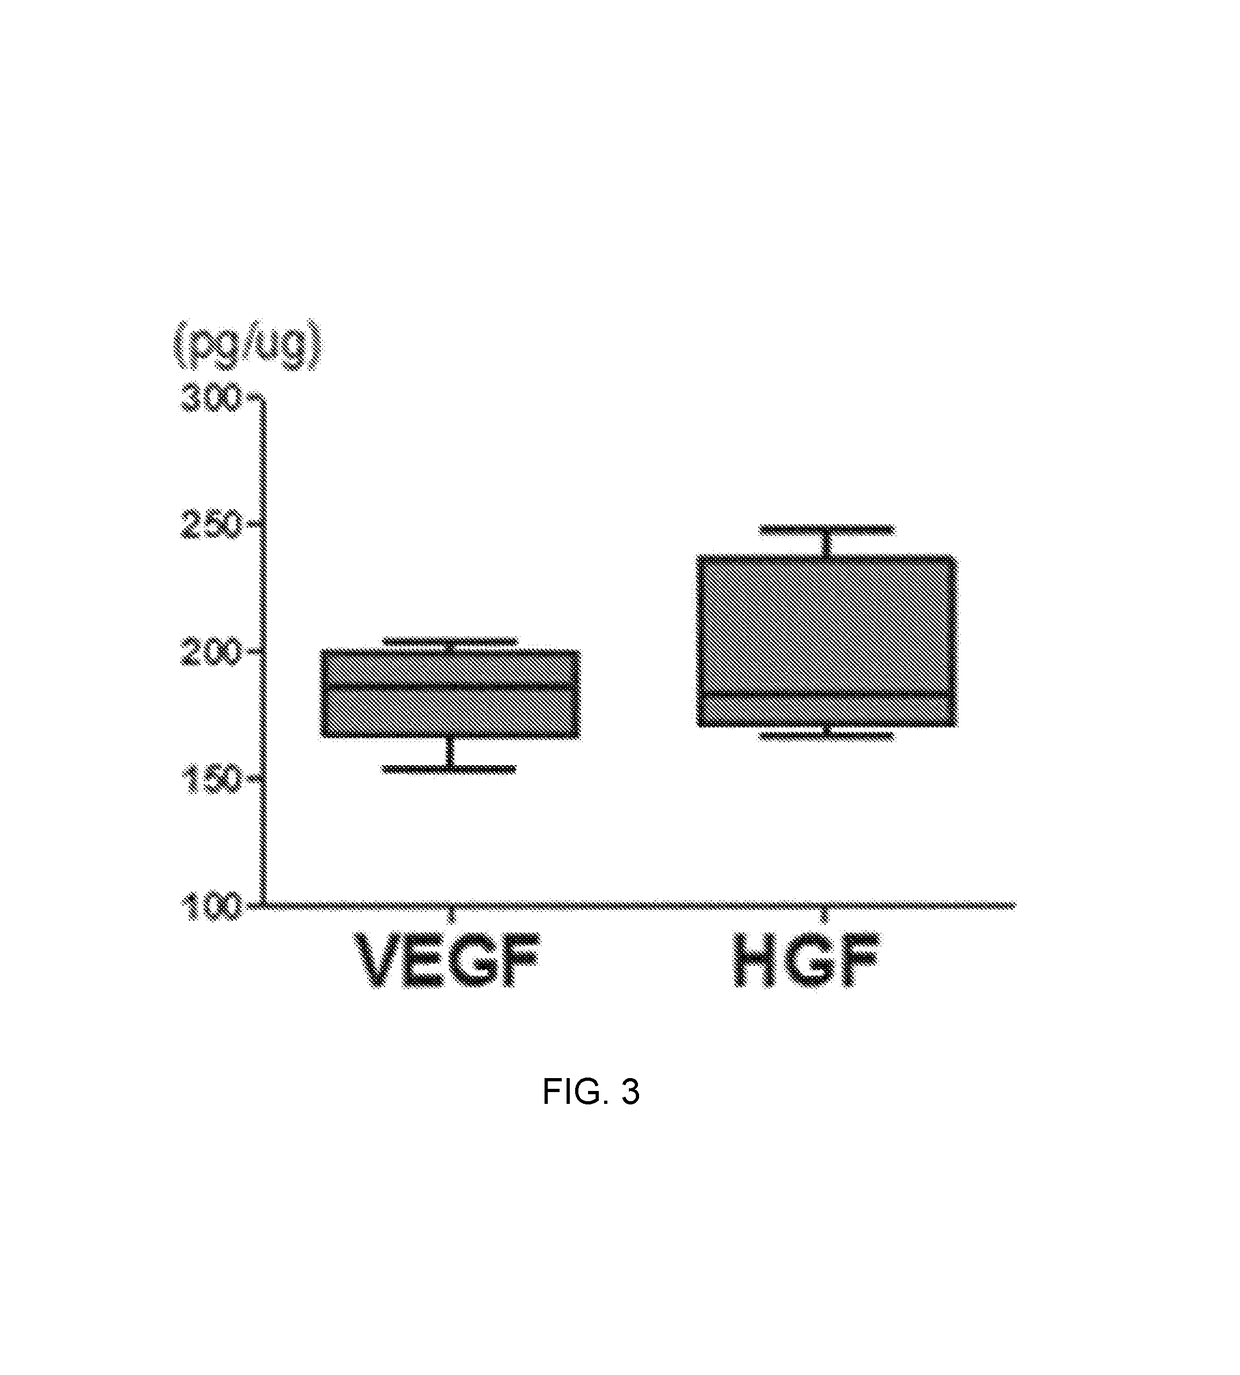 Pharmaceutical composition for treating cerebrovascular diseases, containing stem cell-derived exosome as active ingredient